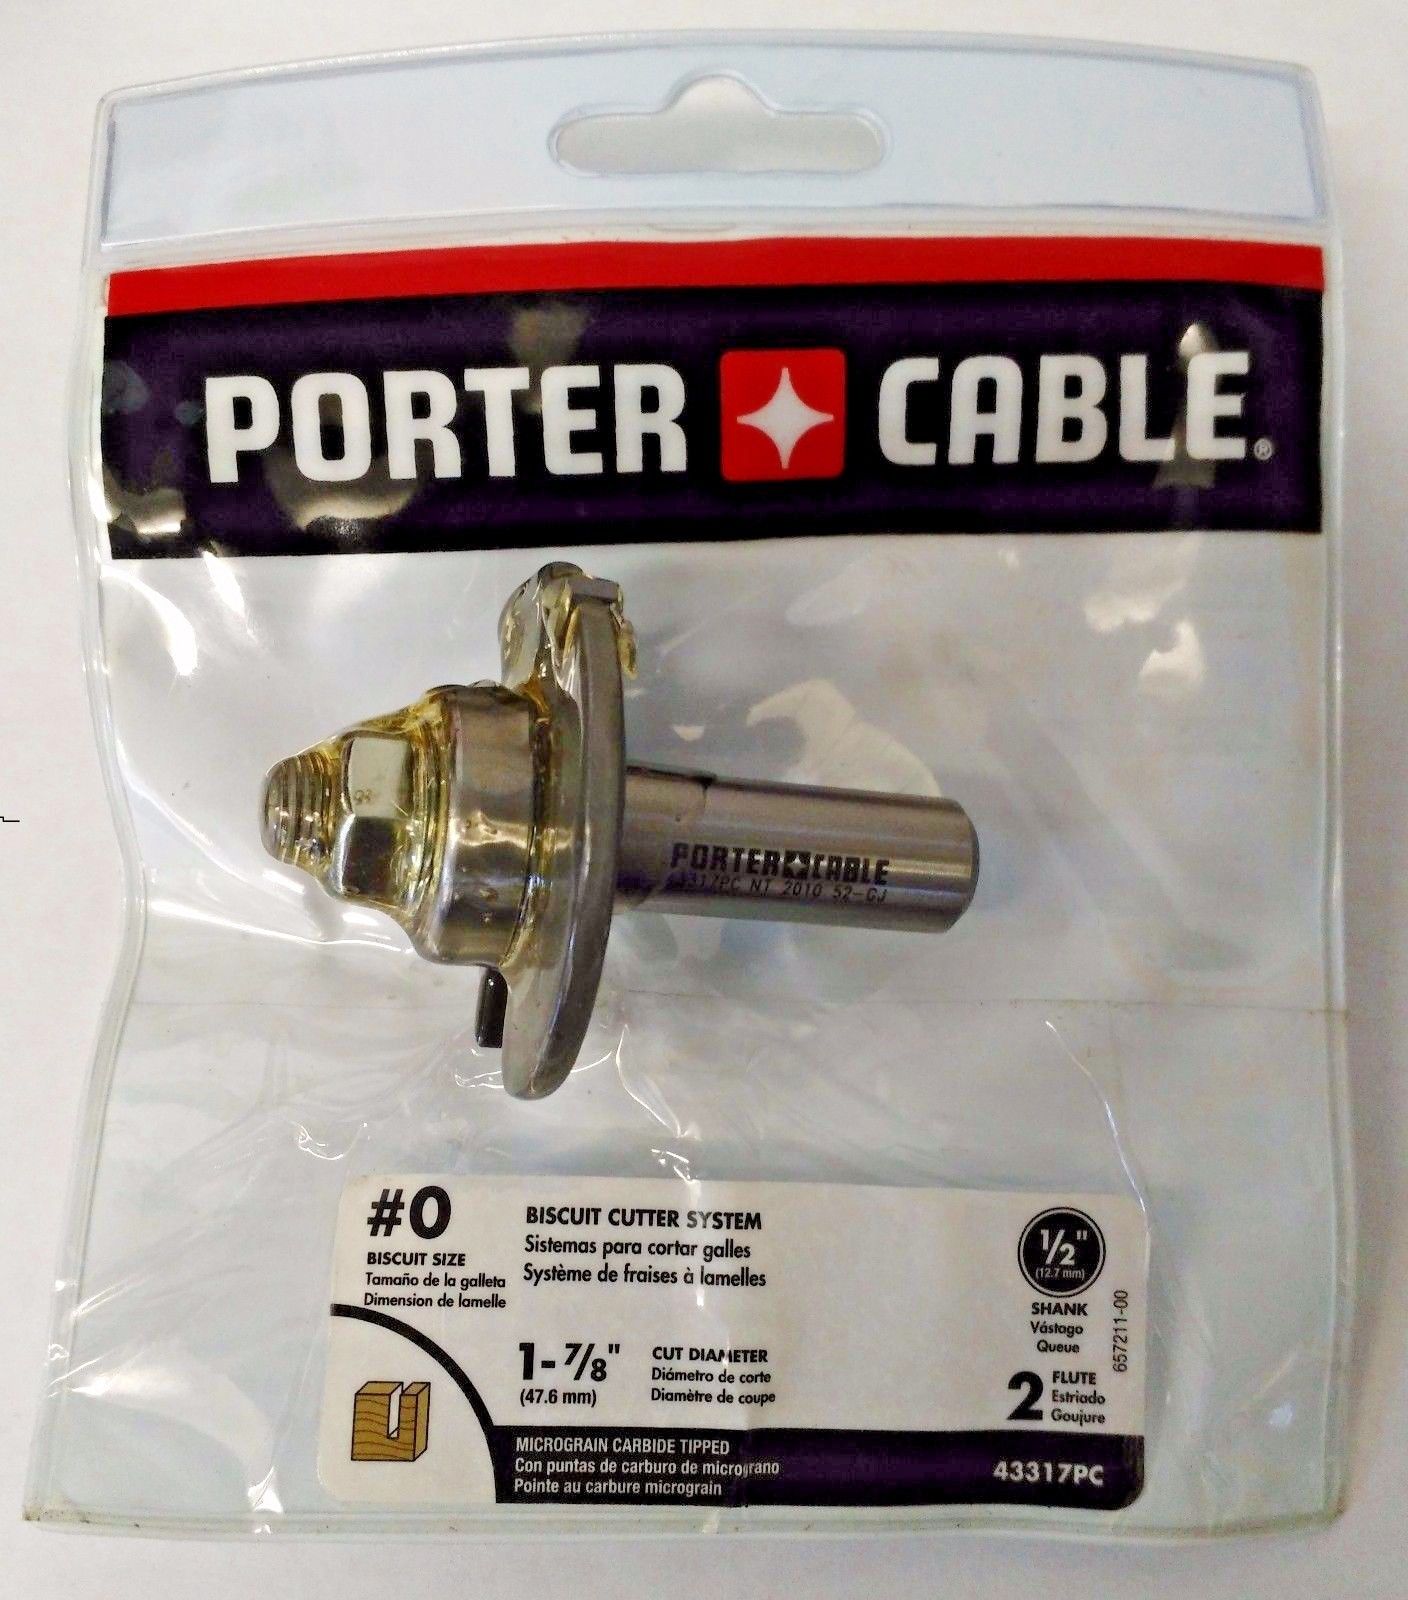 Porter Cable 43317PC #0 Biscuit Cutter System 1/2" Shank 1-7/8" Cut Diameter